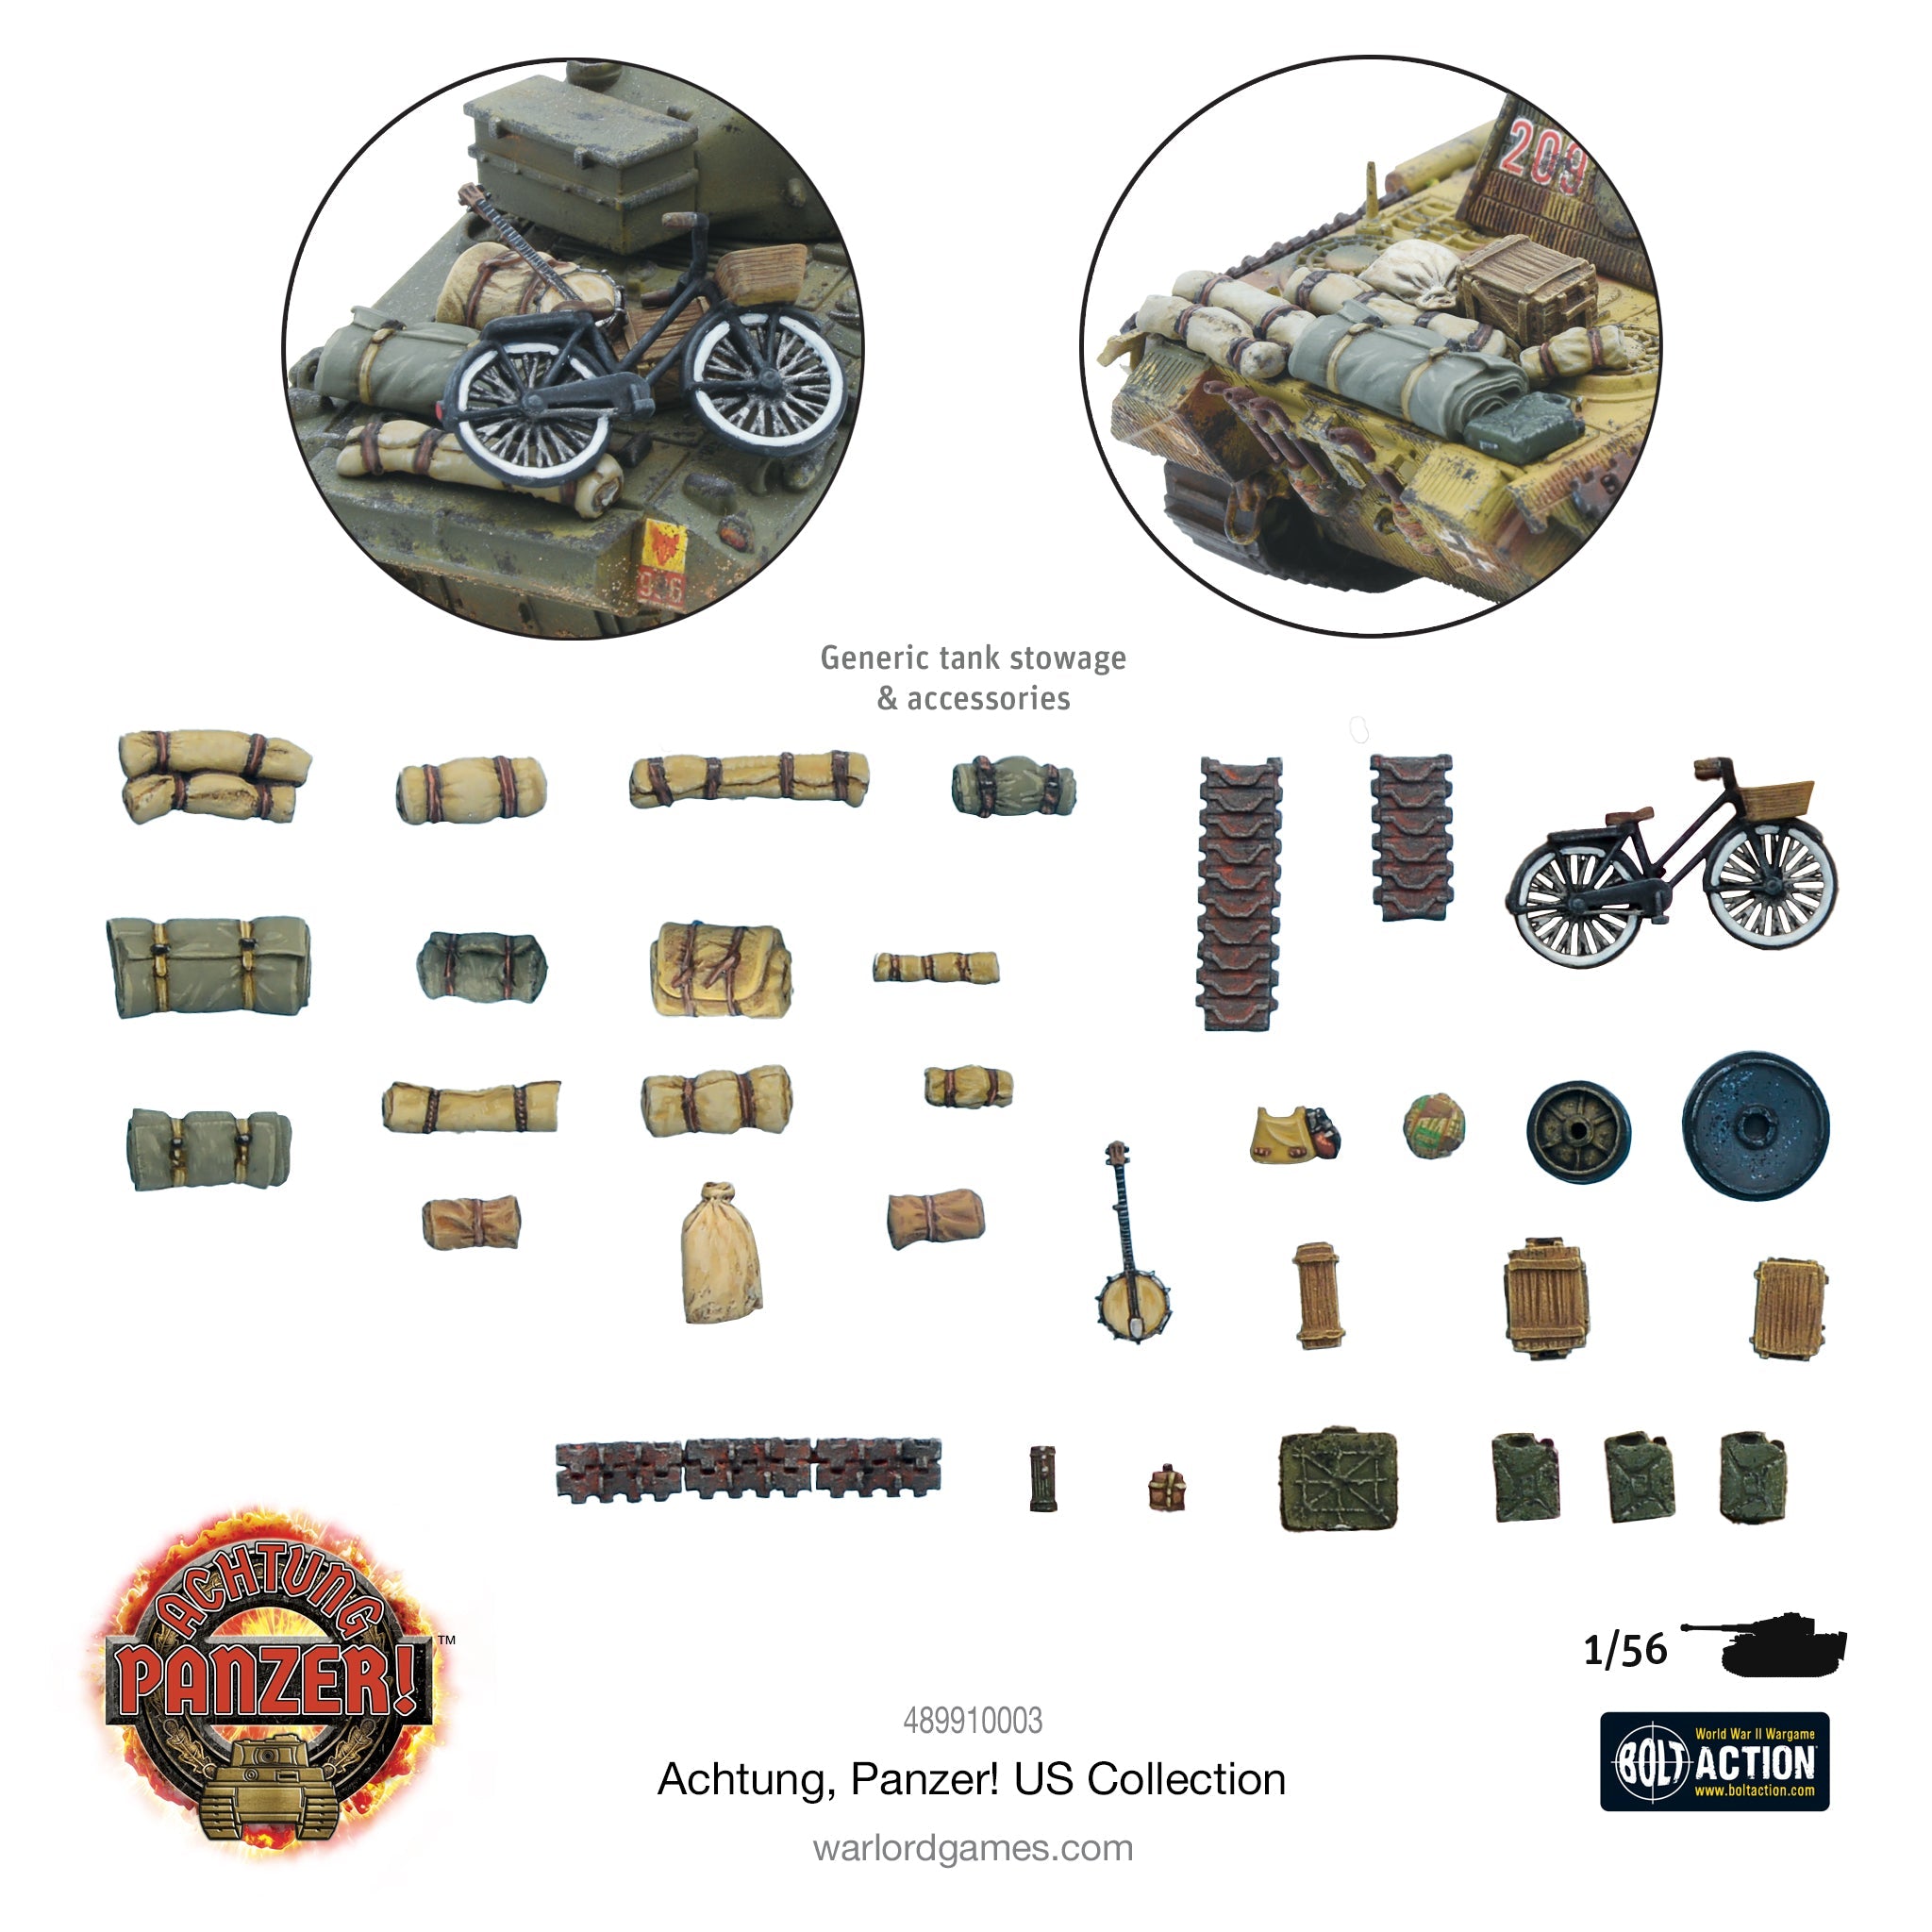 Achtung Panzer! US Collection